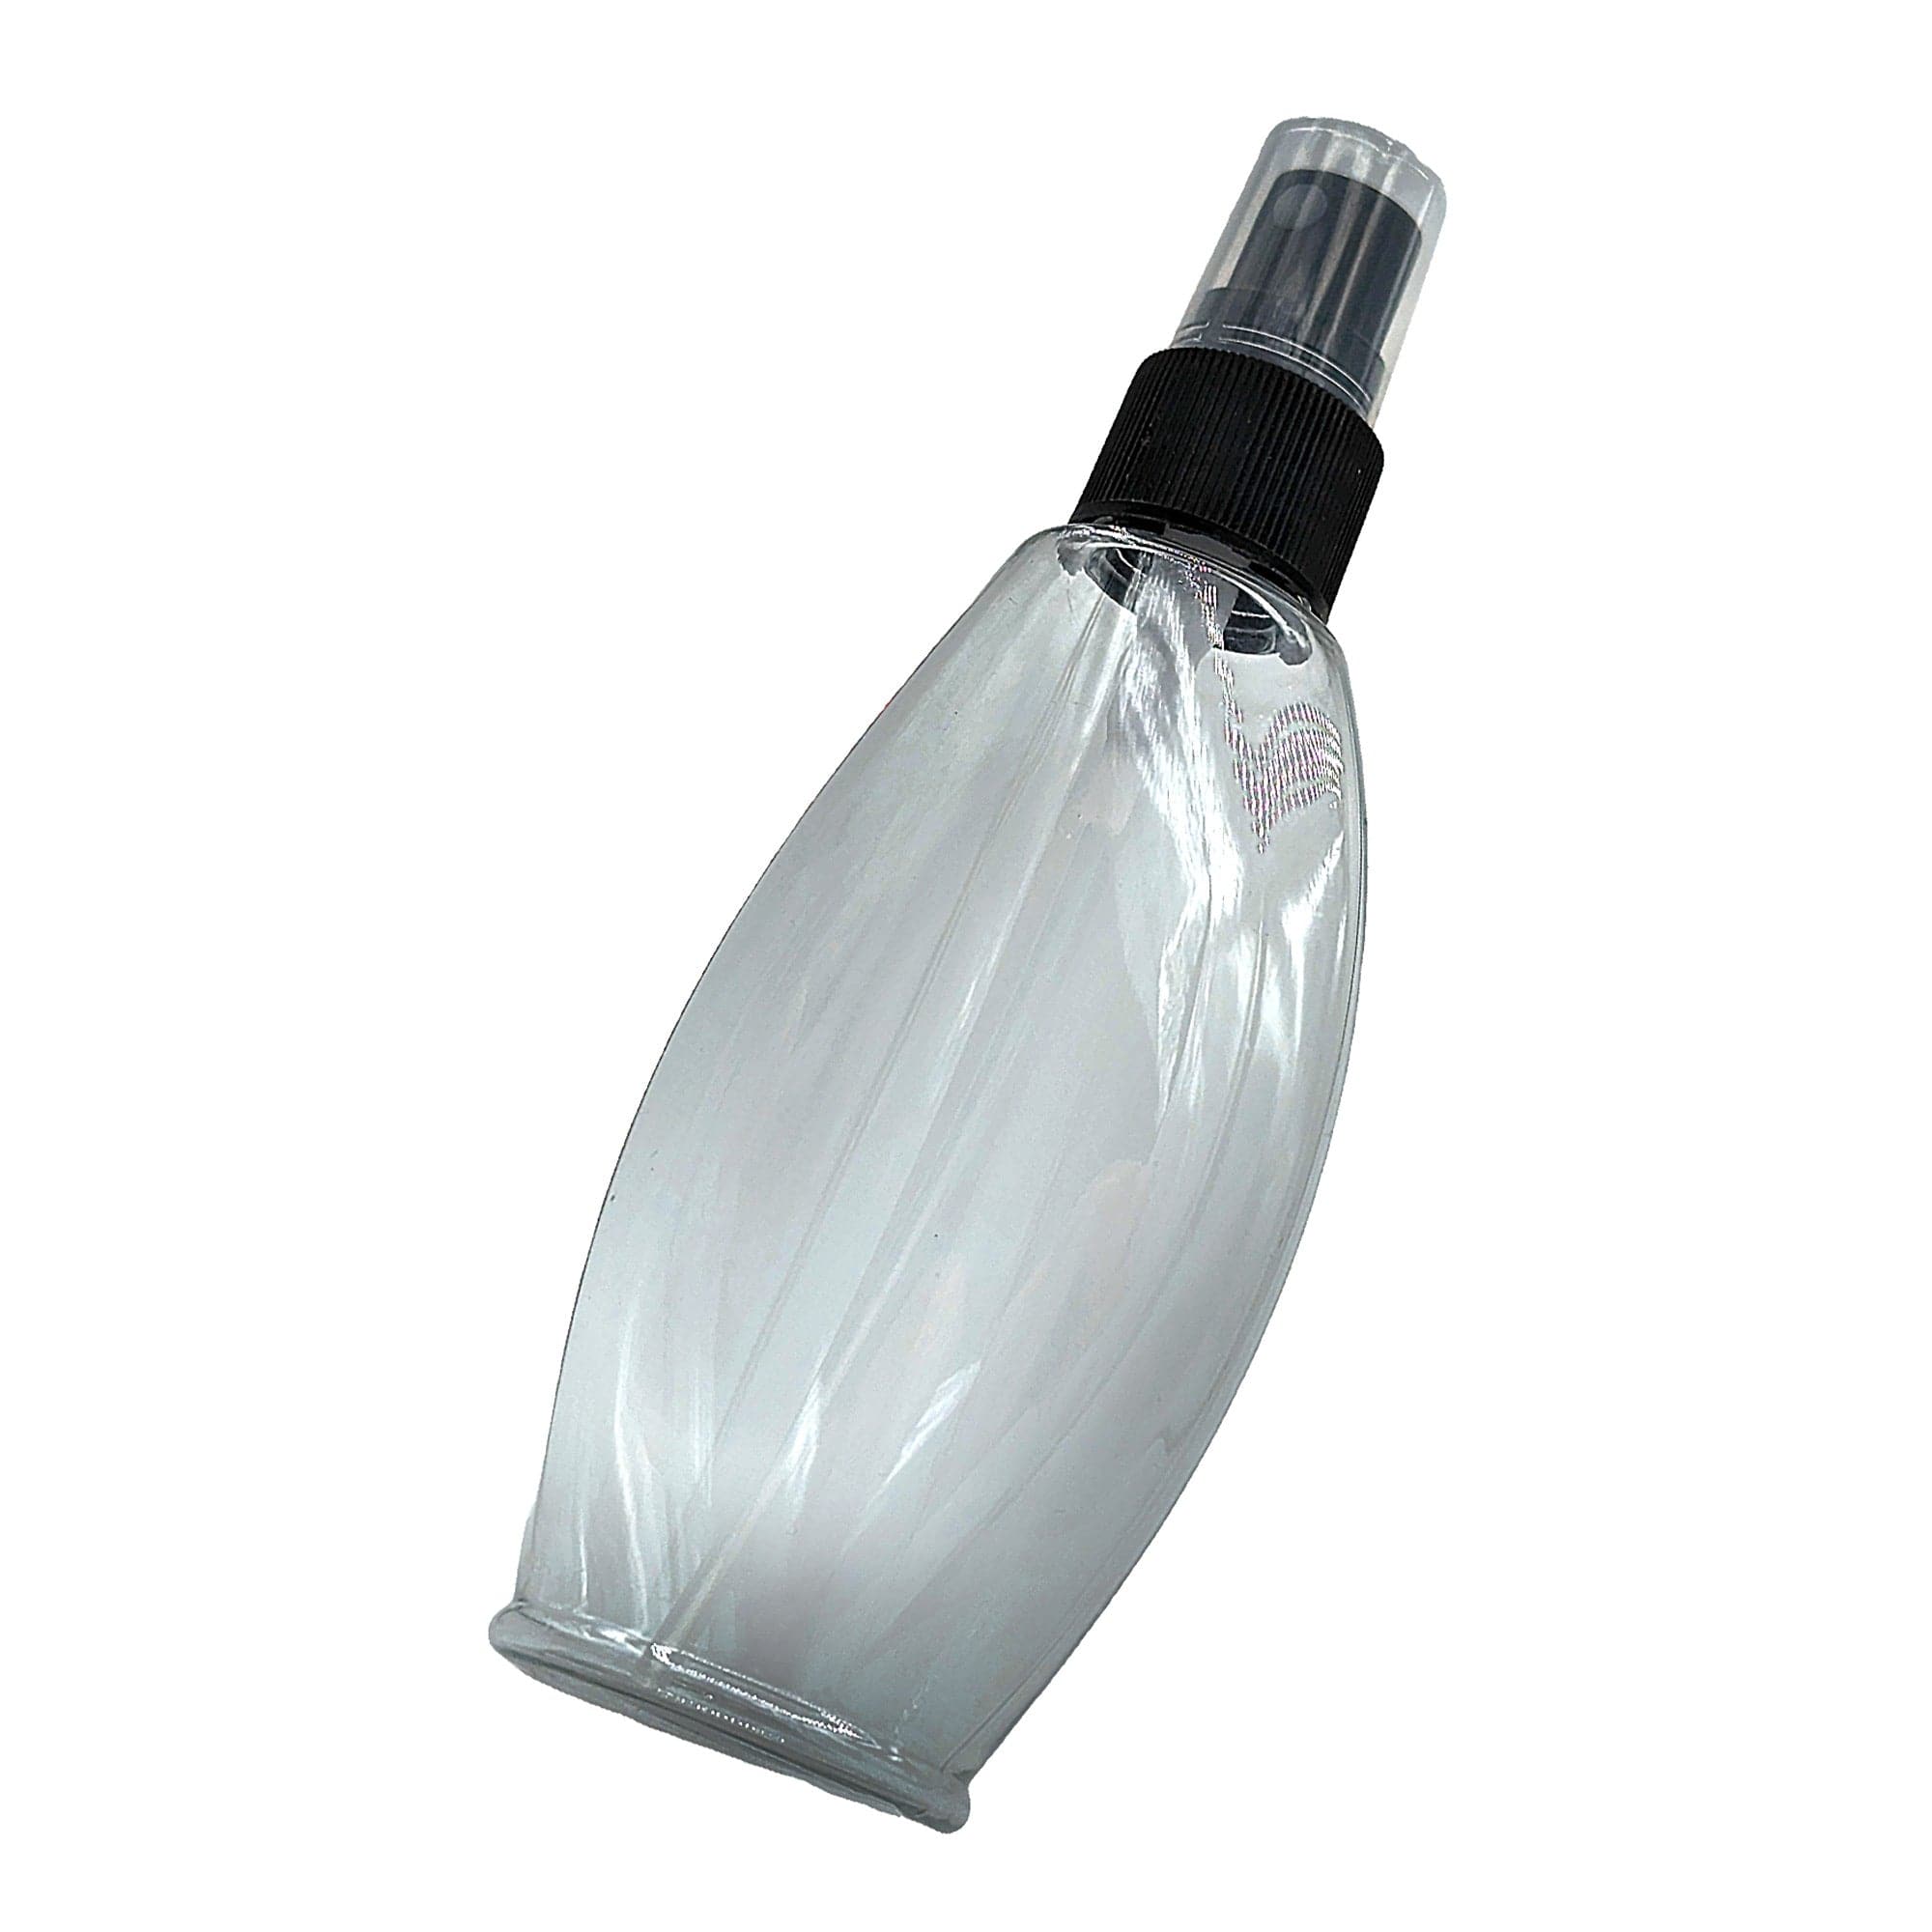 Eson - Water Spray Bottle 100ml Empty Portable Travel Size (Clear)